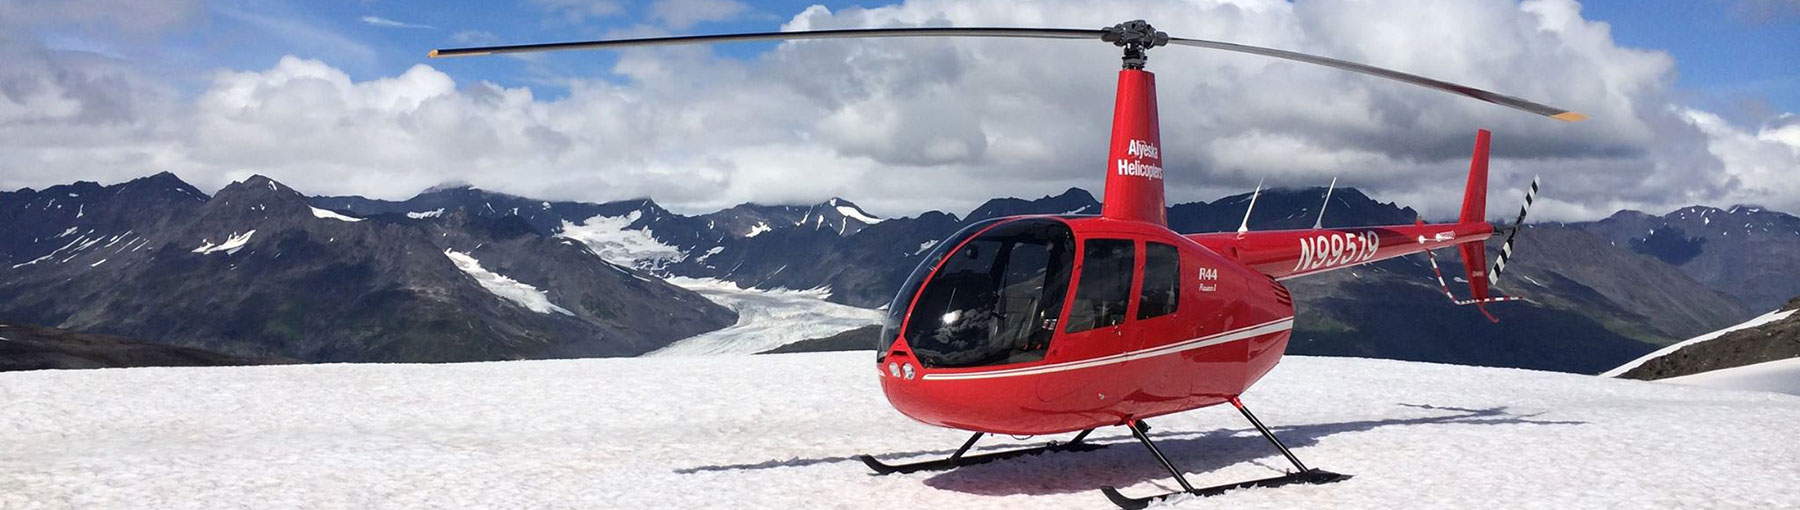 Helicopter landed on snowy field overlooking mountains and glacier.